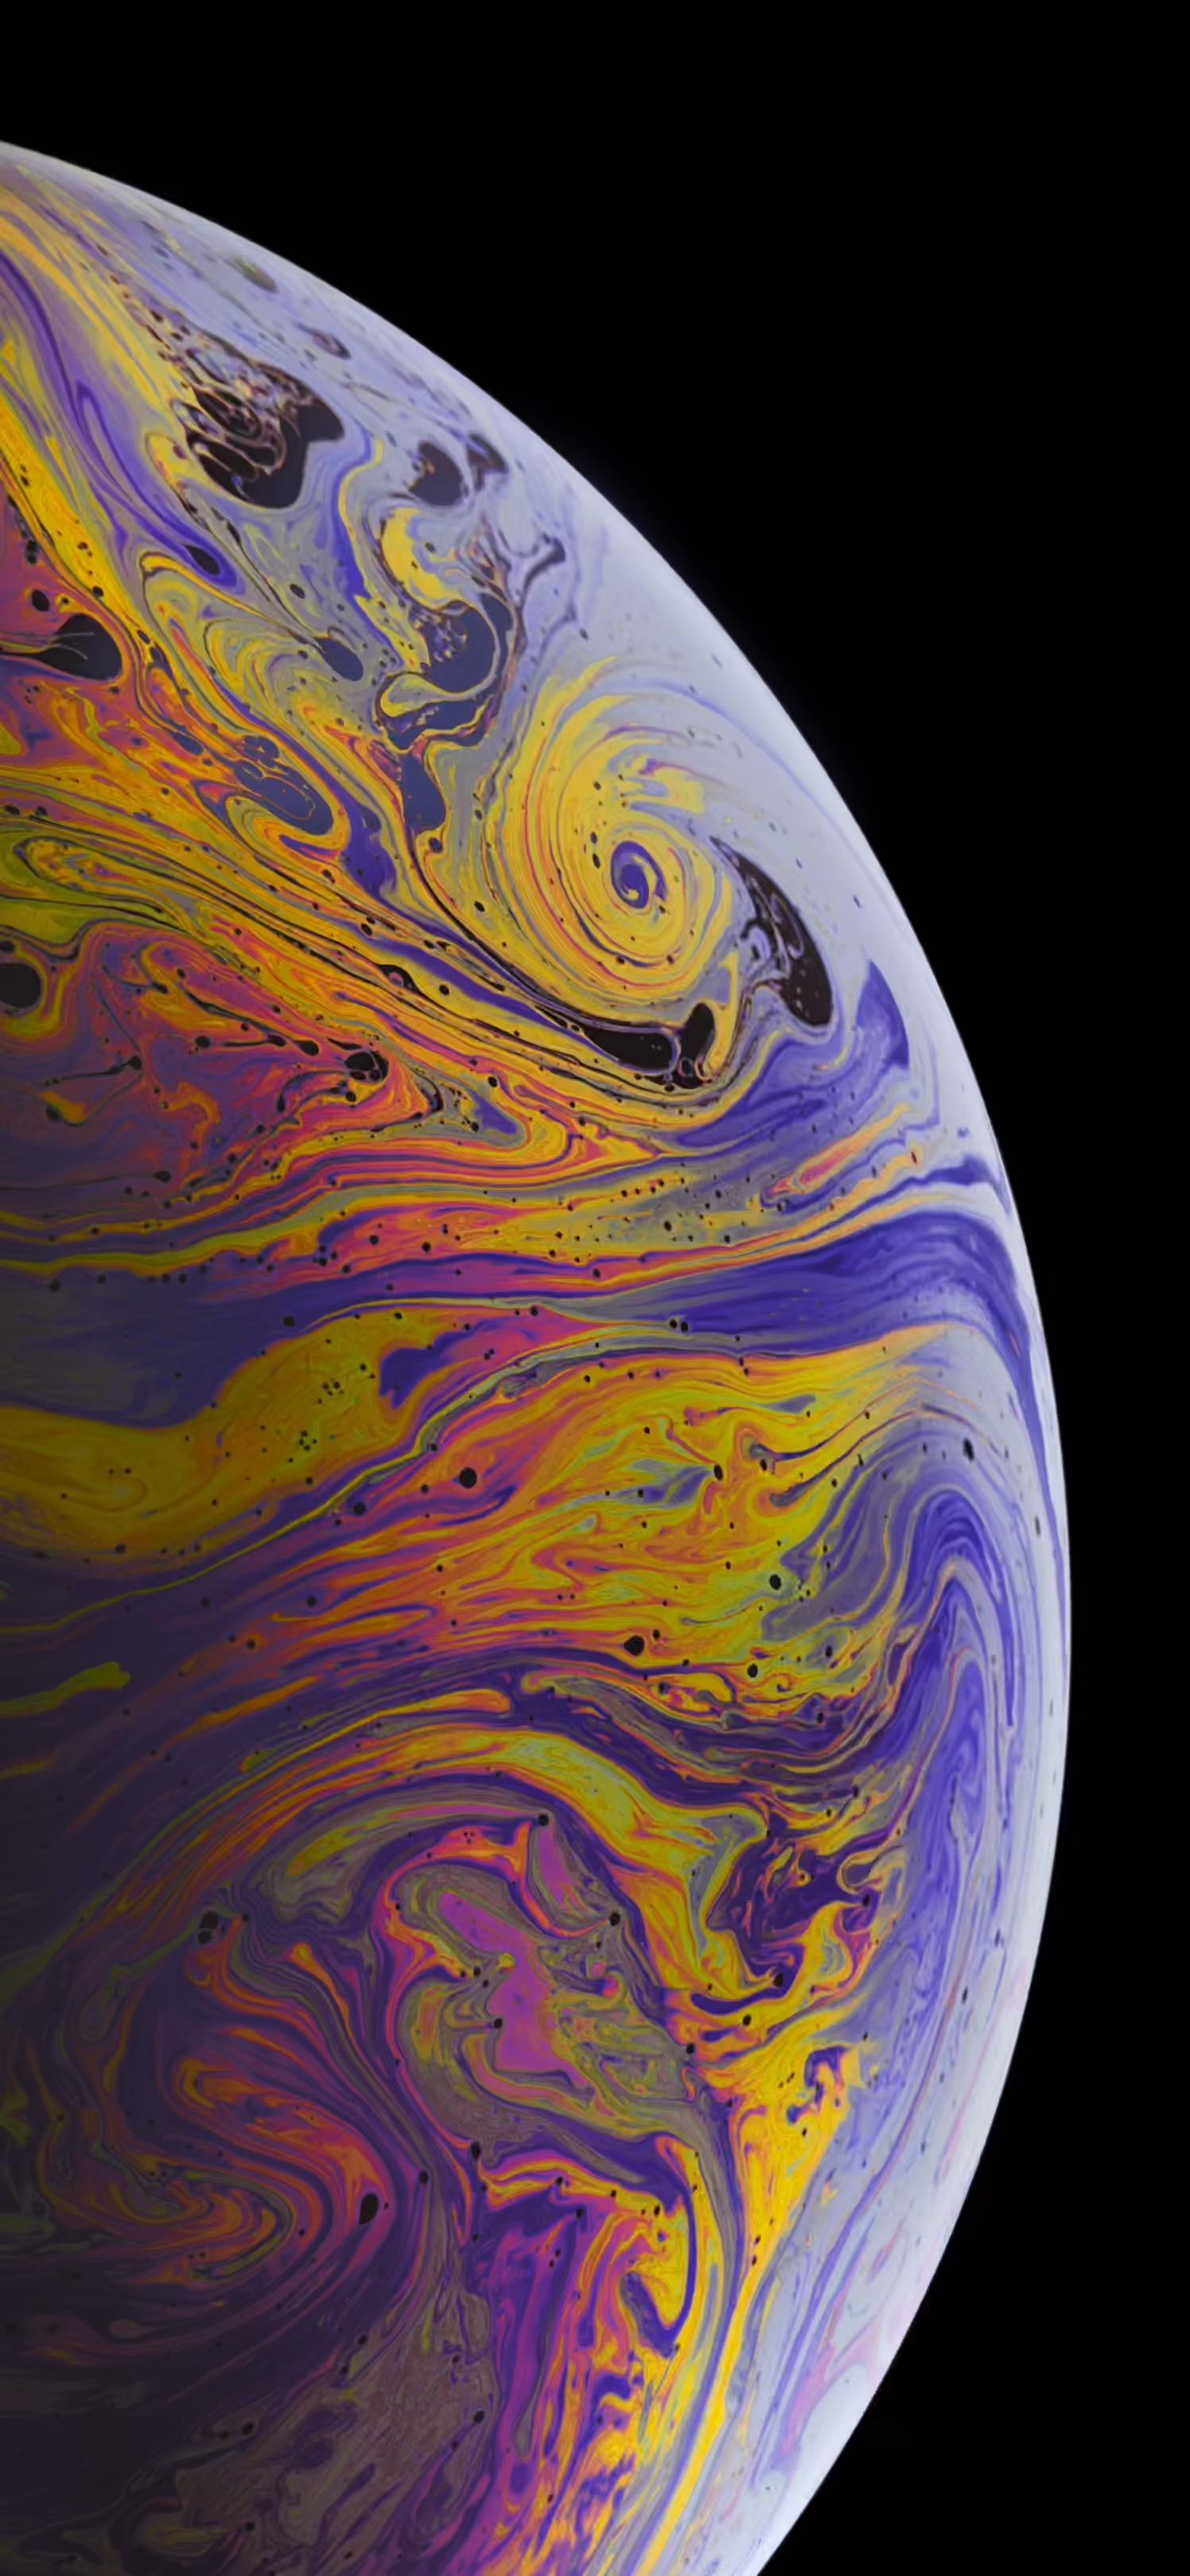 Download the new iPhone Xs and iPhone Xs Max wallpaper right here [Gallery]